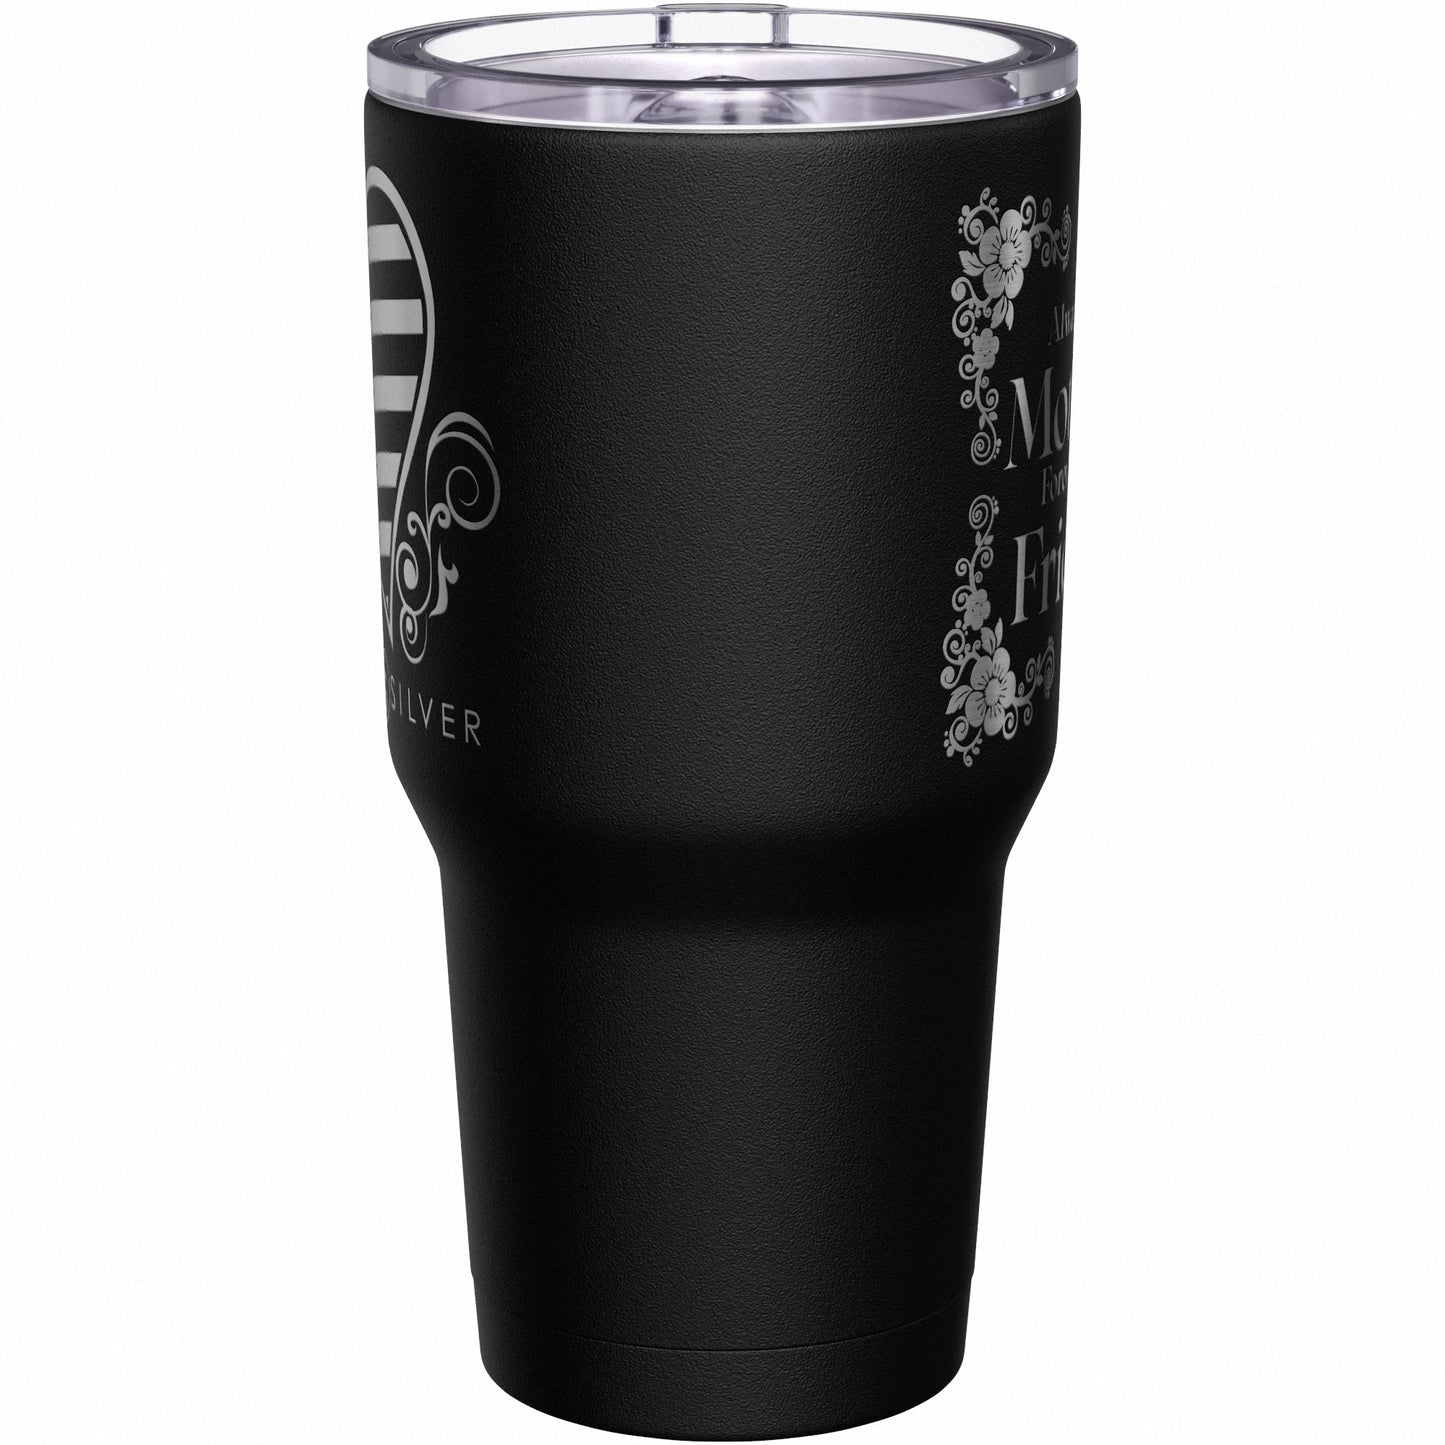 Always My Mother - Forever My Friend Tumbler